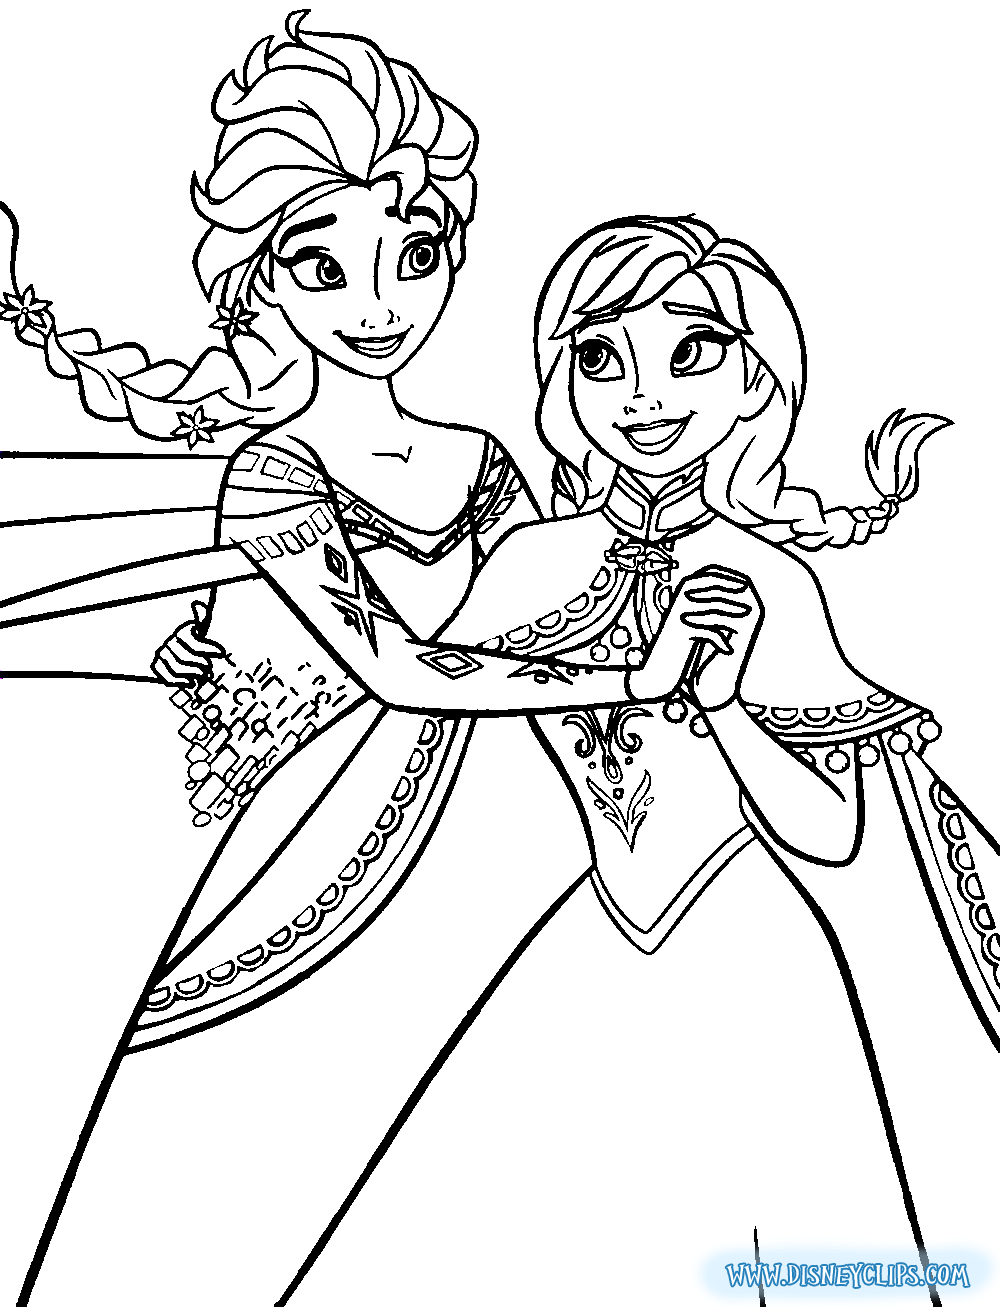 Frozen Elsa Coloring Pages   Only Coloring Pagesonly Coloring Pages